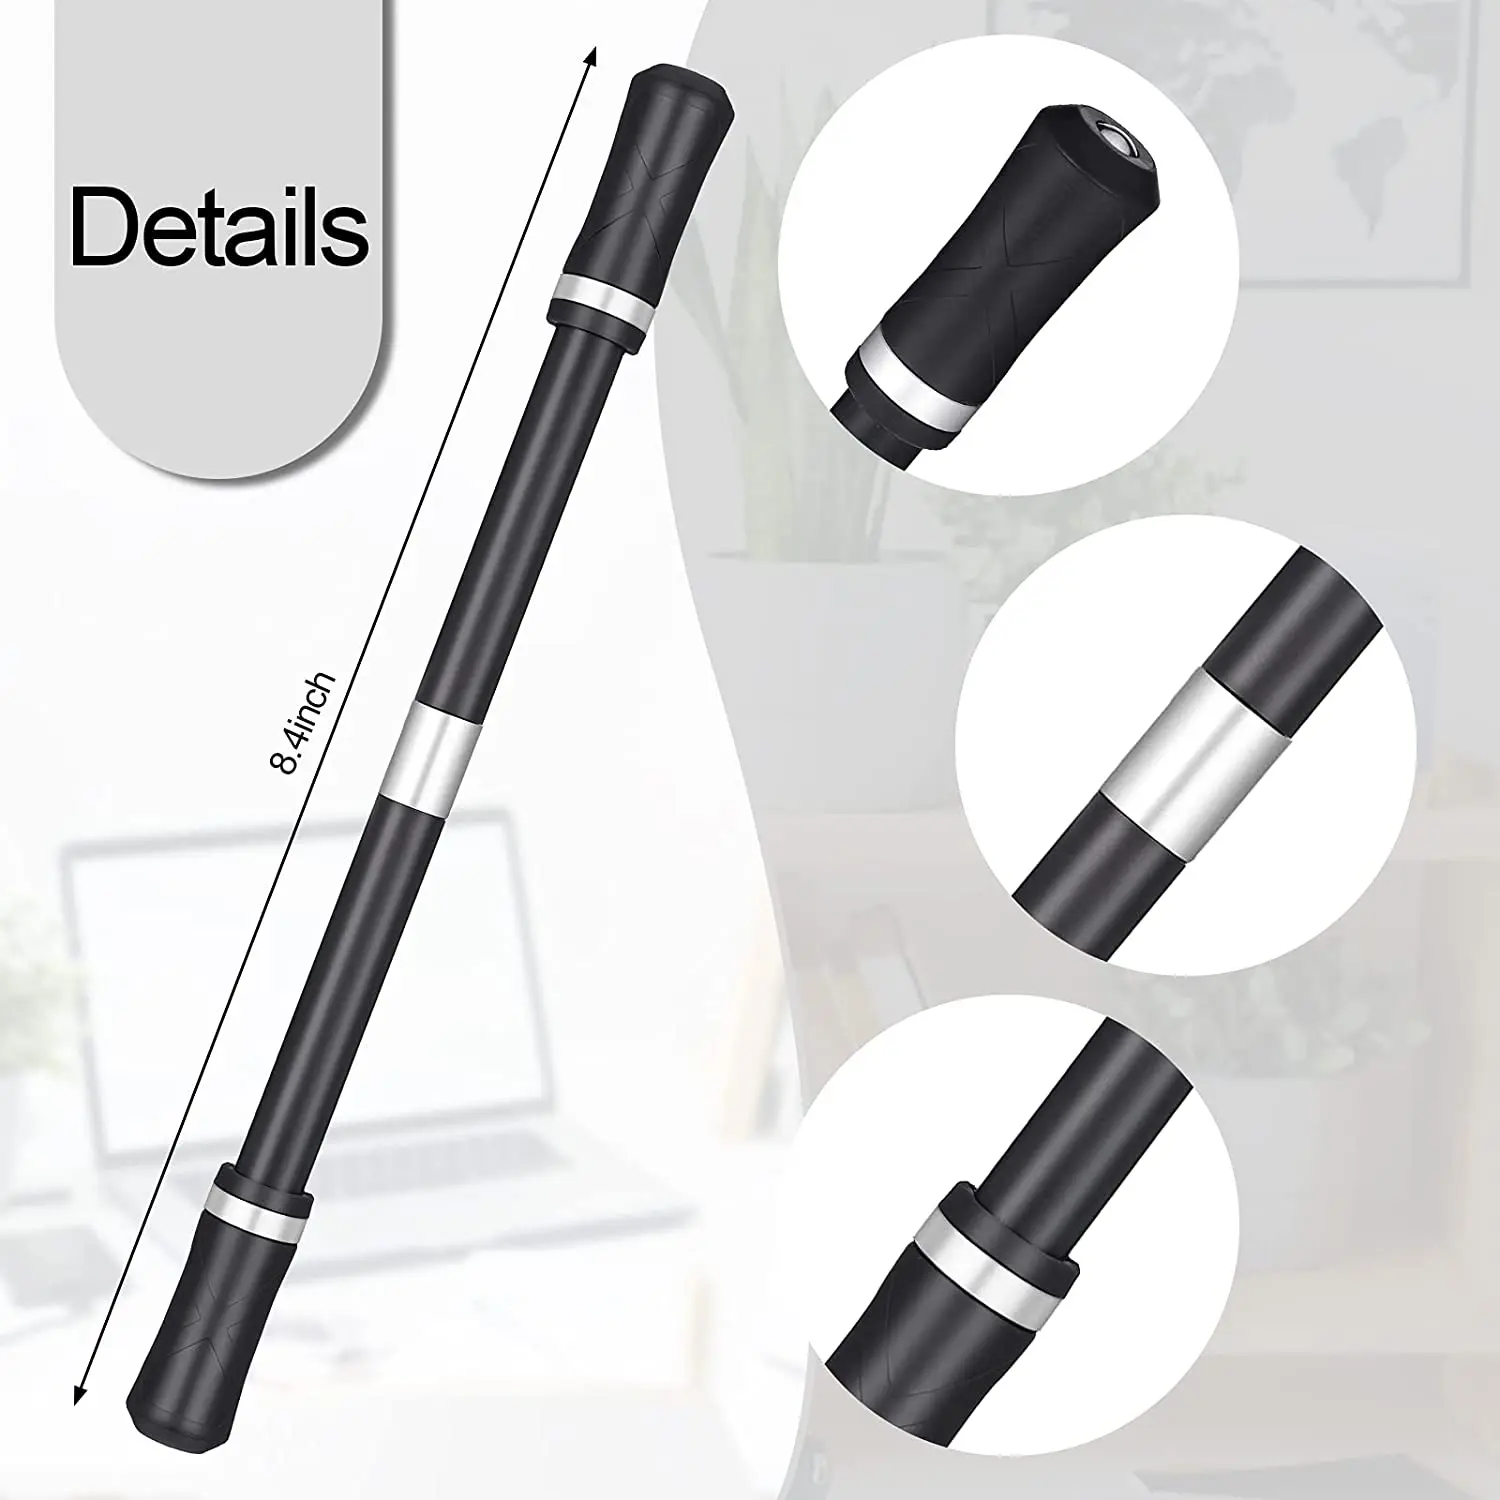 JODOUEEIR Pen Spinning,Pen Spinning Mod,Detachable Pen Spinner,Stress  Releasing Brain Training Spin Pen for Kids and Adults,Suitable for All Ages